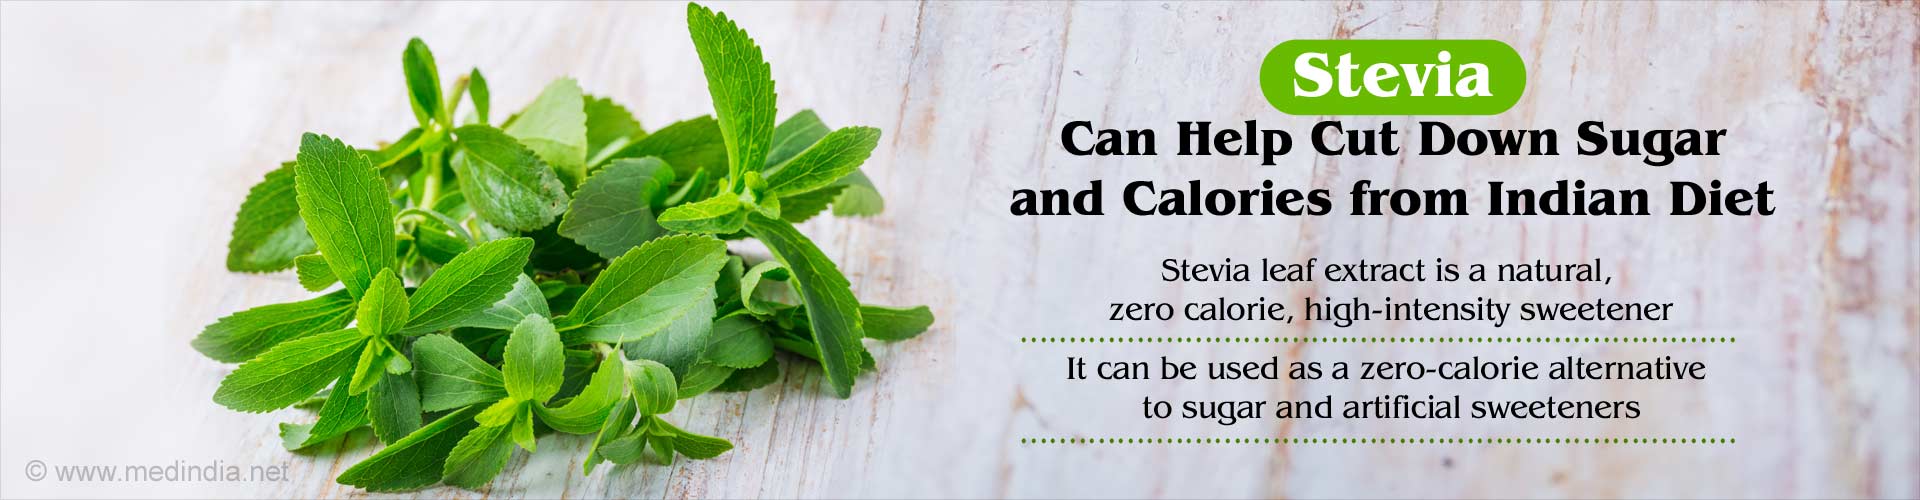 stevia can help cut down sugar and calories from indian diet
- stevia leaf extract is a natural, zero calorie, high intensity sweetner
- it can be used as a zero-calorie alternative to sugar and artificial sweetners
